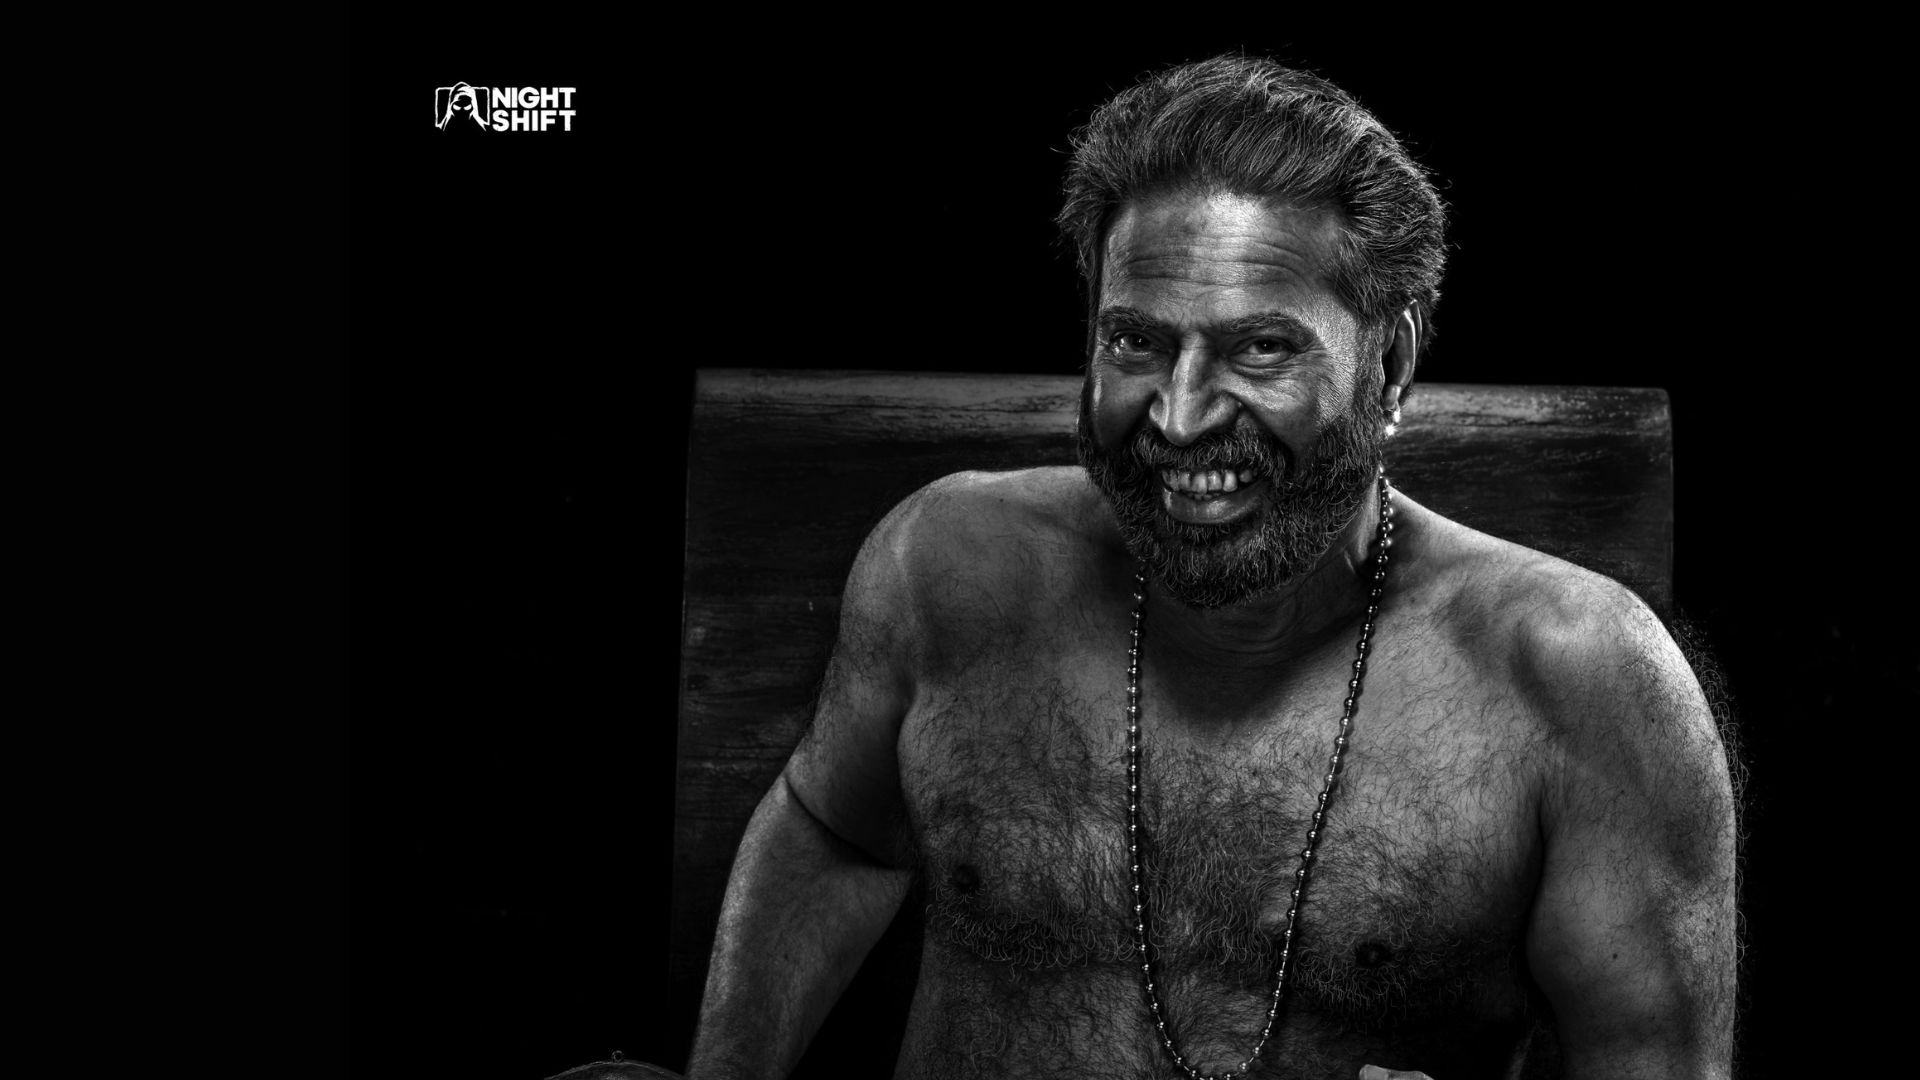 Bramayugam review: An above average movie experience with excellent performances from the actors